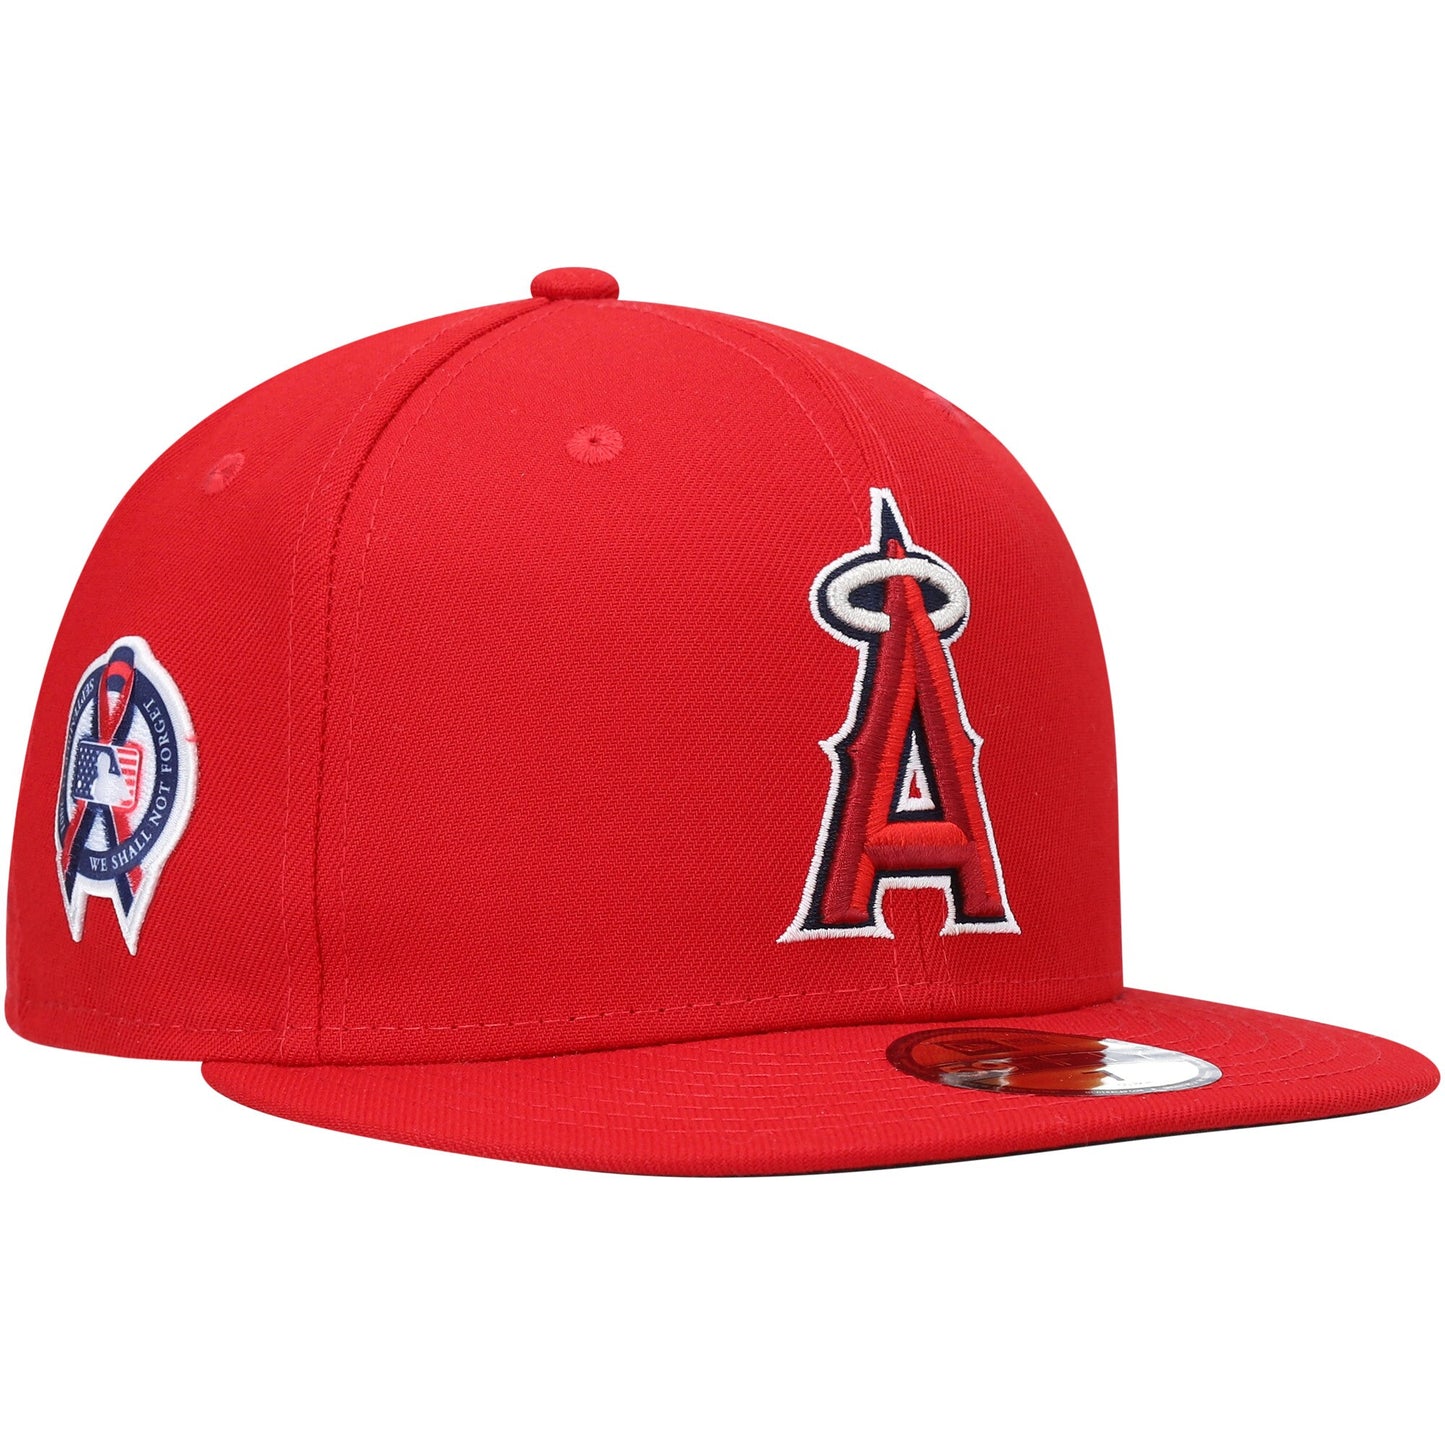 Los Angeles Angels New Era 9/11 Memorial Side Patch 59FIFTY Fitted Hat - Red